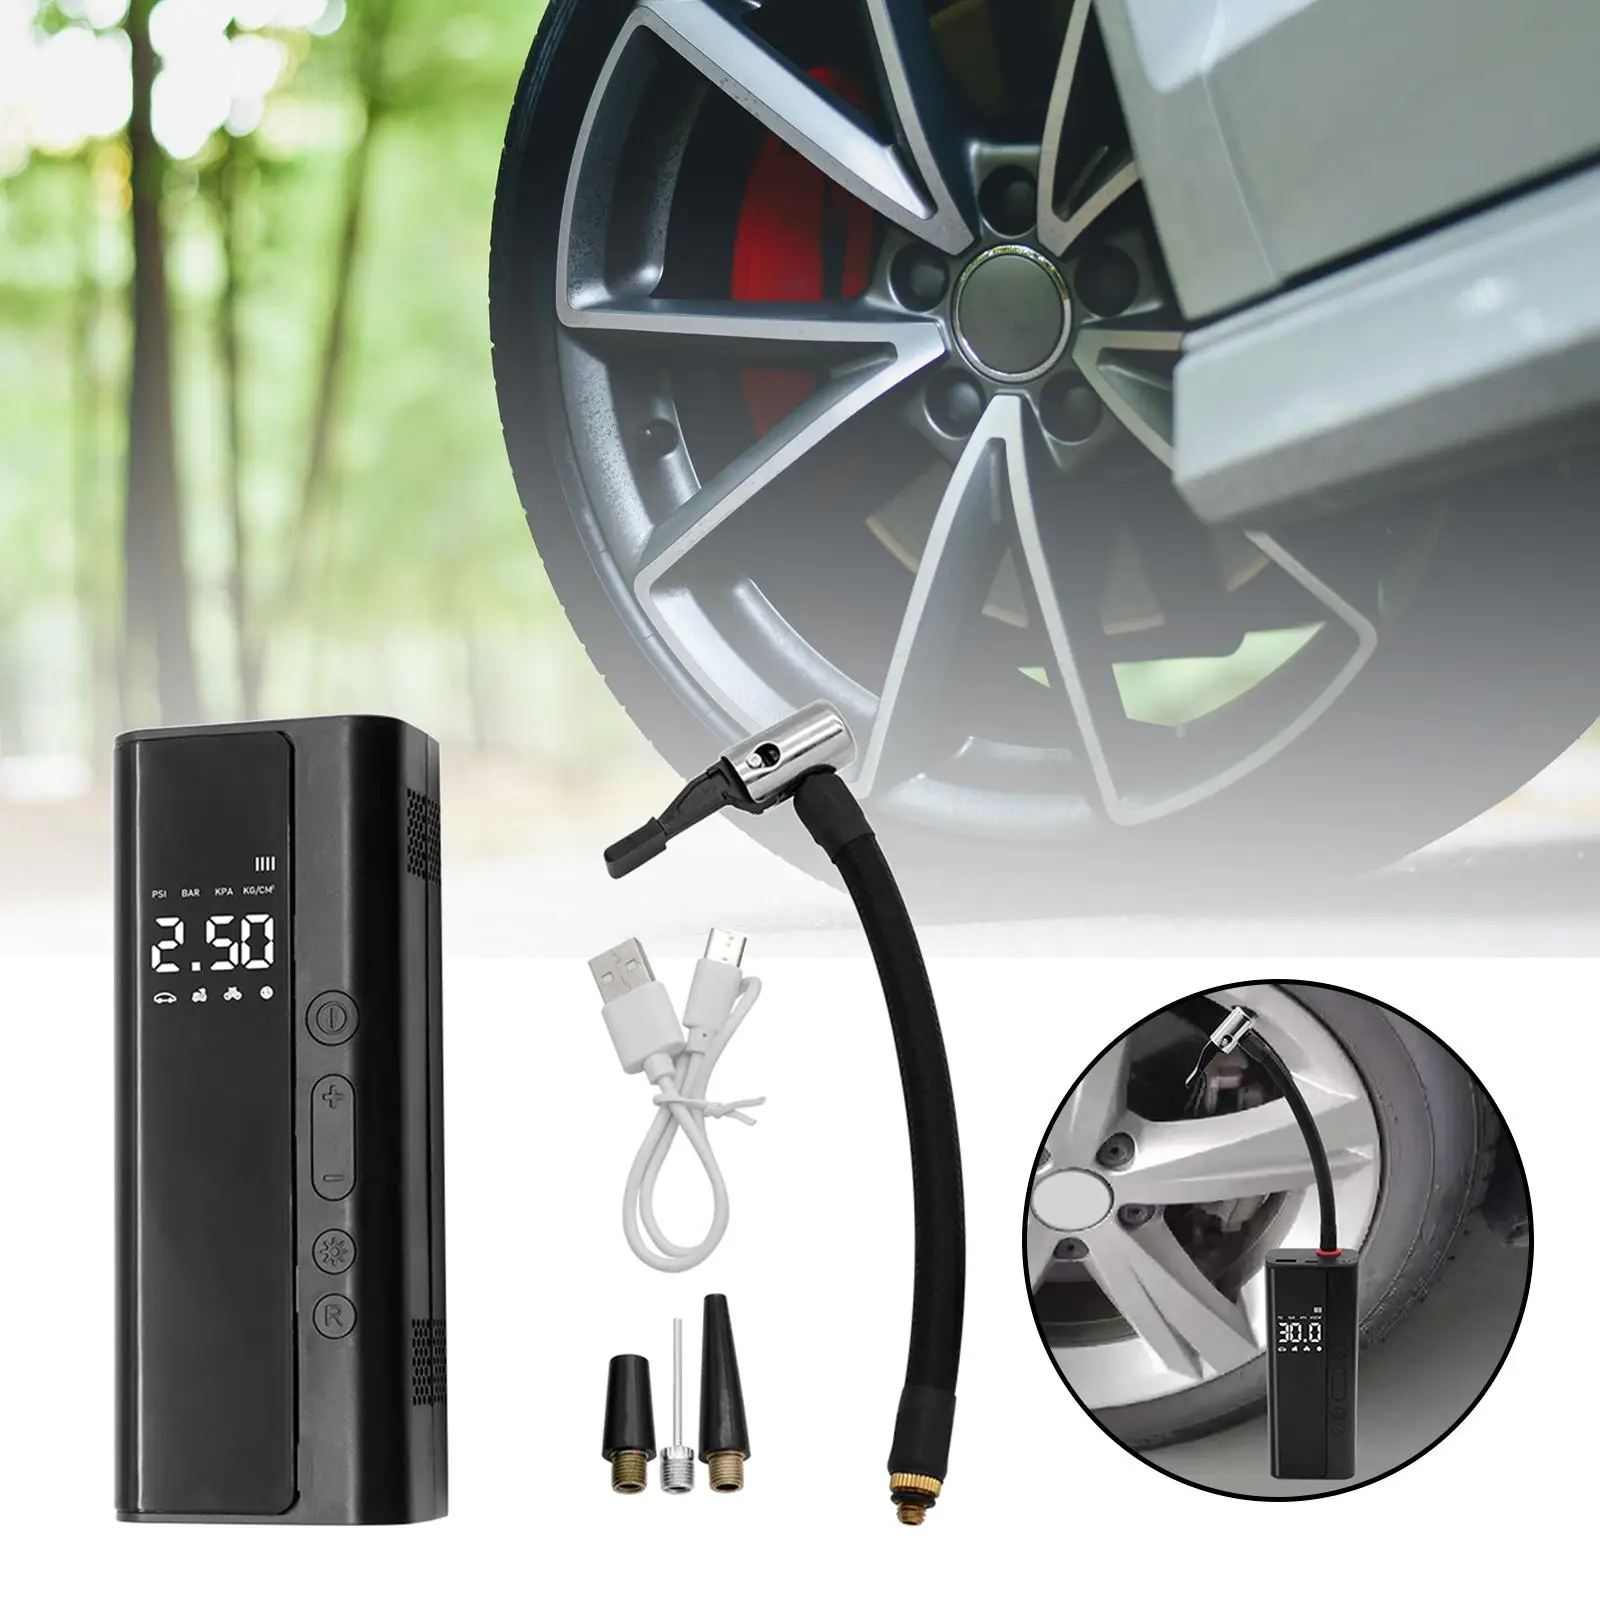 

Tire Inflator Multipurpose with LED Light Car Accessories Pump Tire Pump Portable Air Compressor for Balls Car